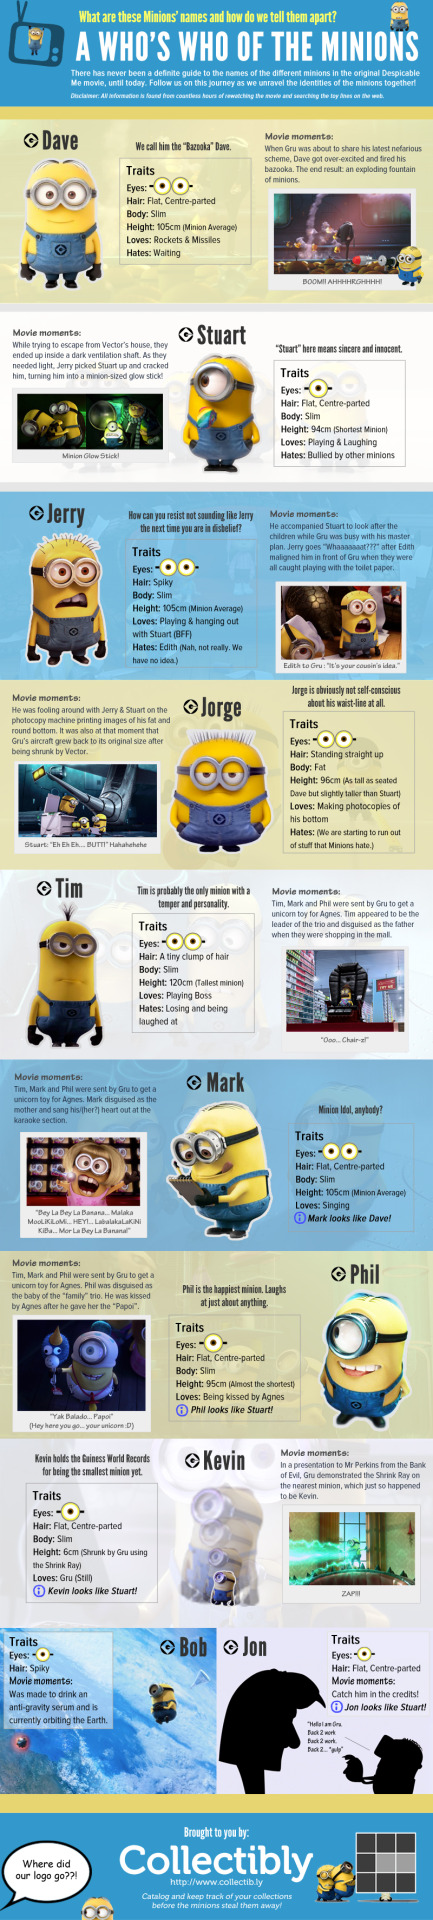 A Whos Who of the MinionsGuide to Despicable Me MinionsNote: Click on the image to view a higher resolution version of the infographic! Enjoy :)Are you a collector looking for a place to catalog your own collections and connect with other collectors who share the same interests? Then you might want to check out collectibly at http://www.collectib.ly or follow us for the latest developments on Collectibly.  